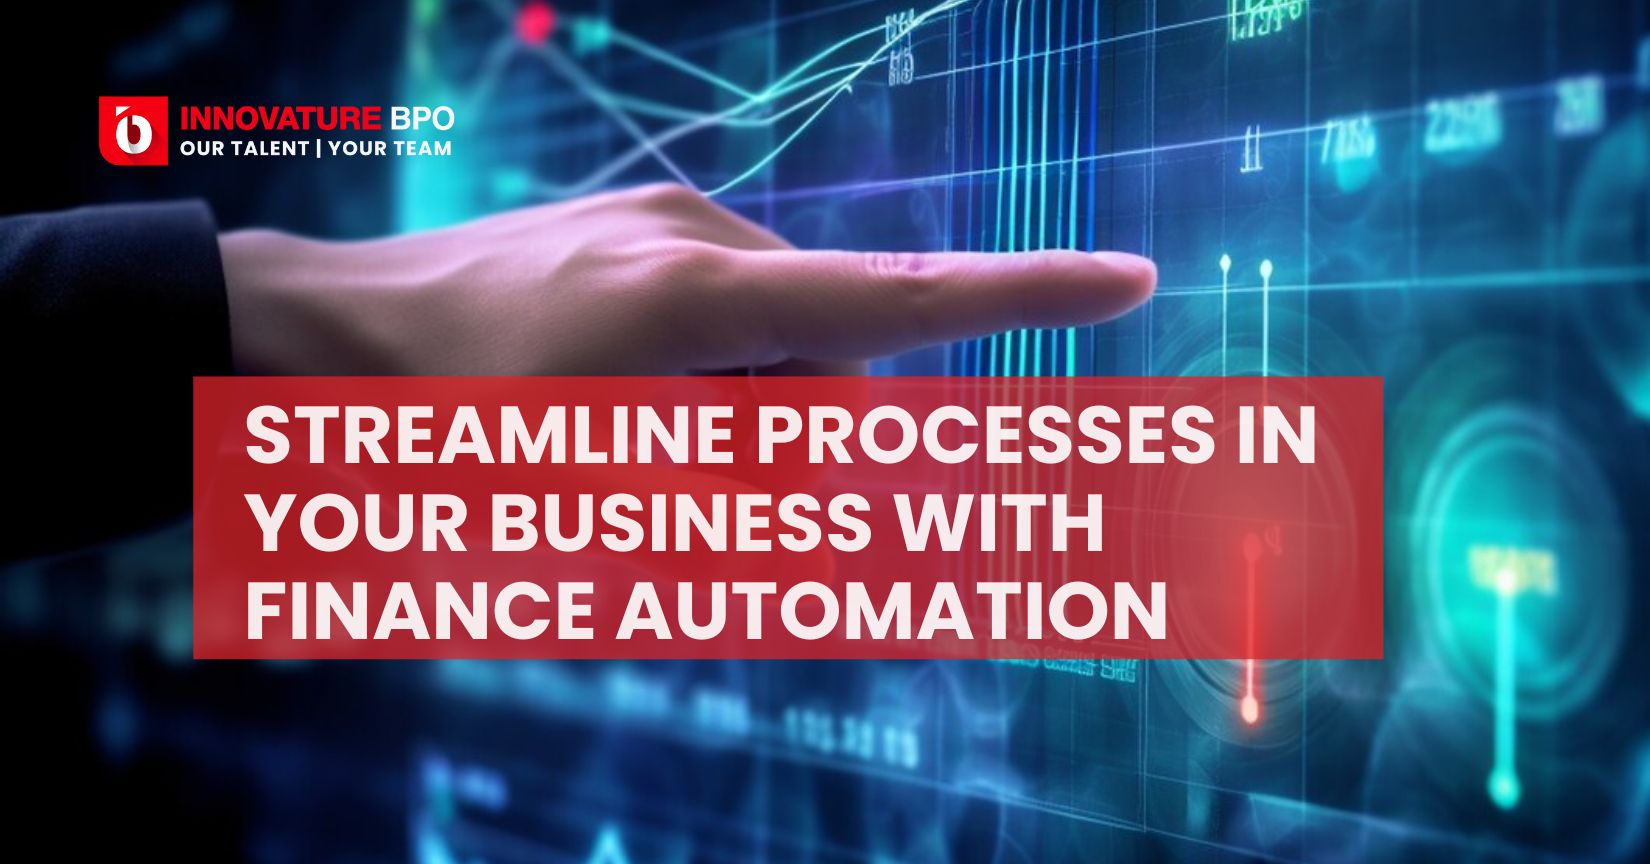 Finance Automation: How To Streamline Business Processes